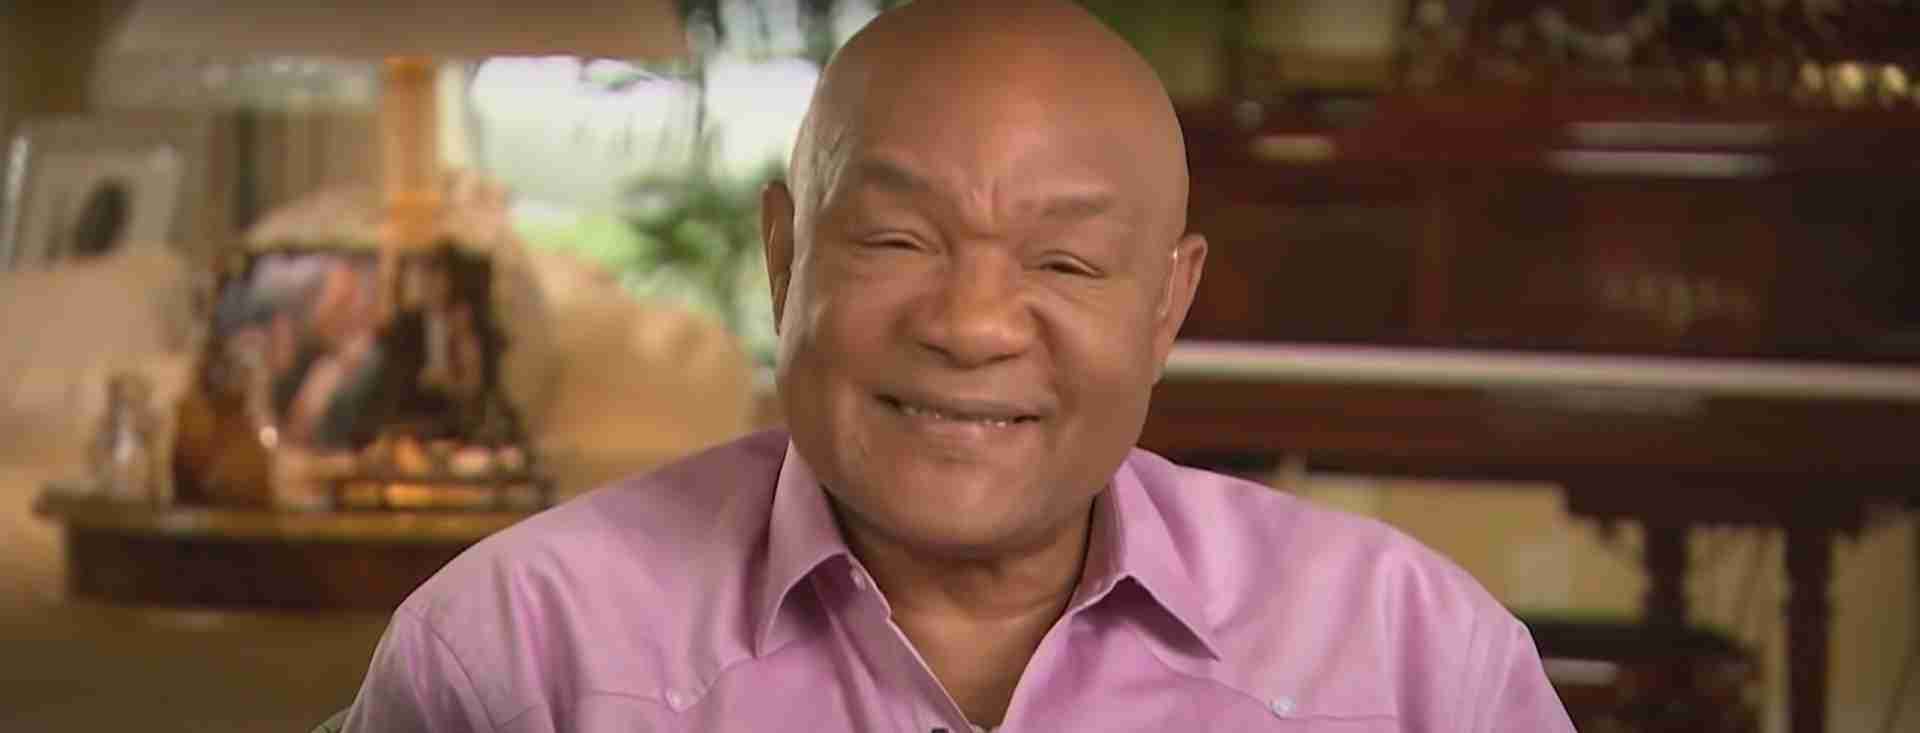 George Foreman On His Top 5 Heavyweights Of All Time